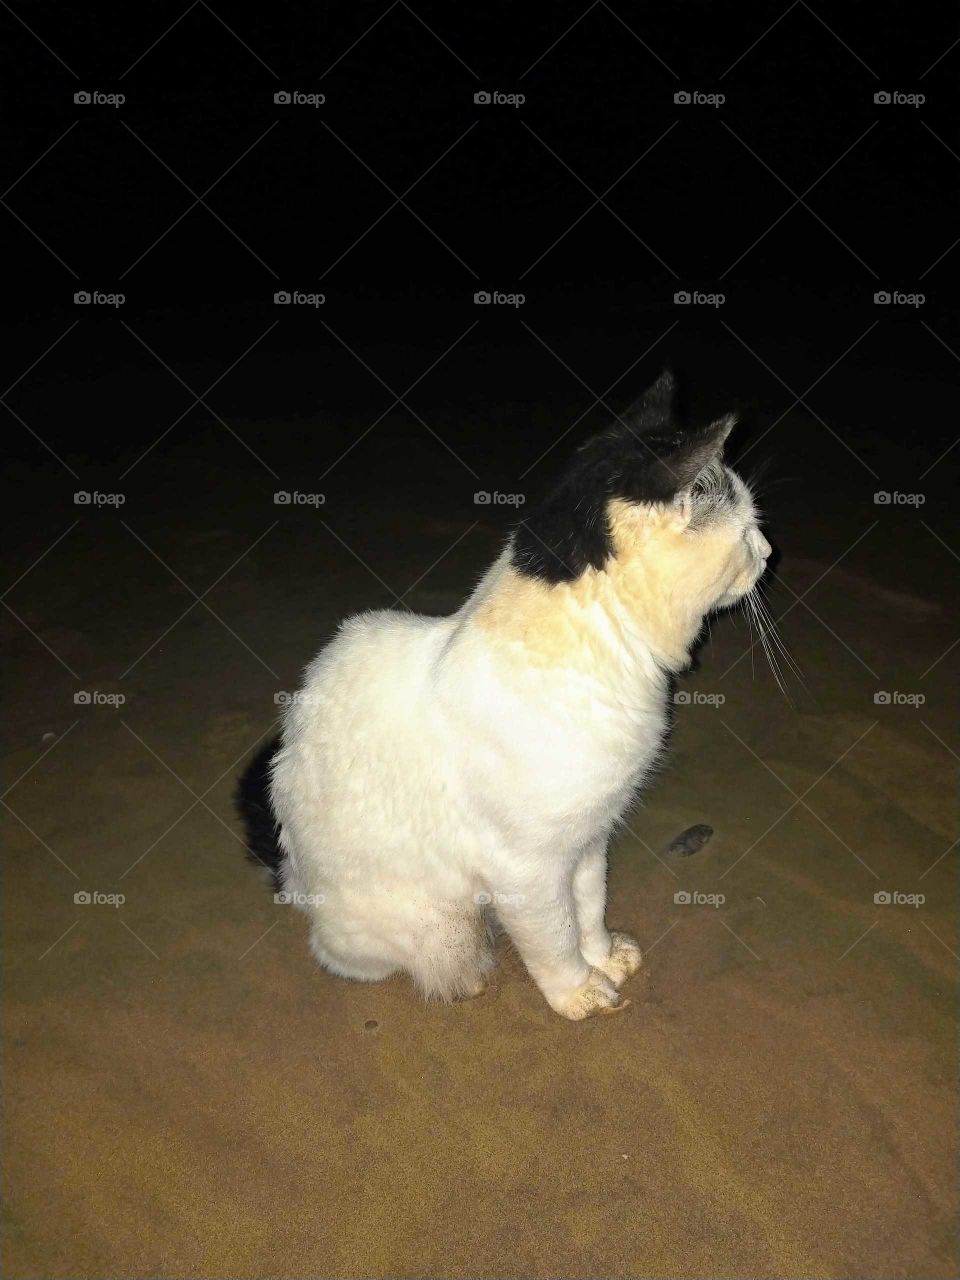 A 🐱 cat of the beach...while we were on the beach at night fishing,this white cat came to us ..I took a photo of it...